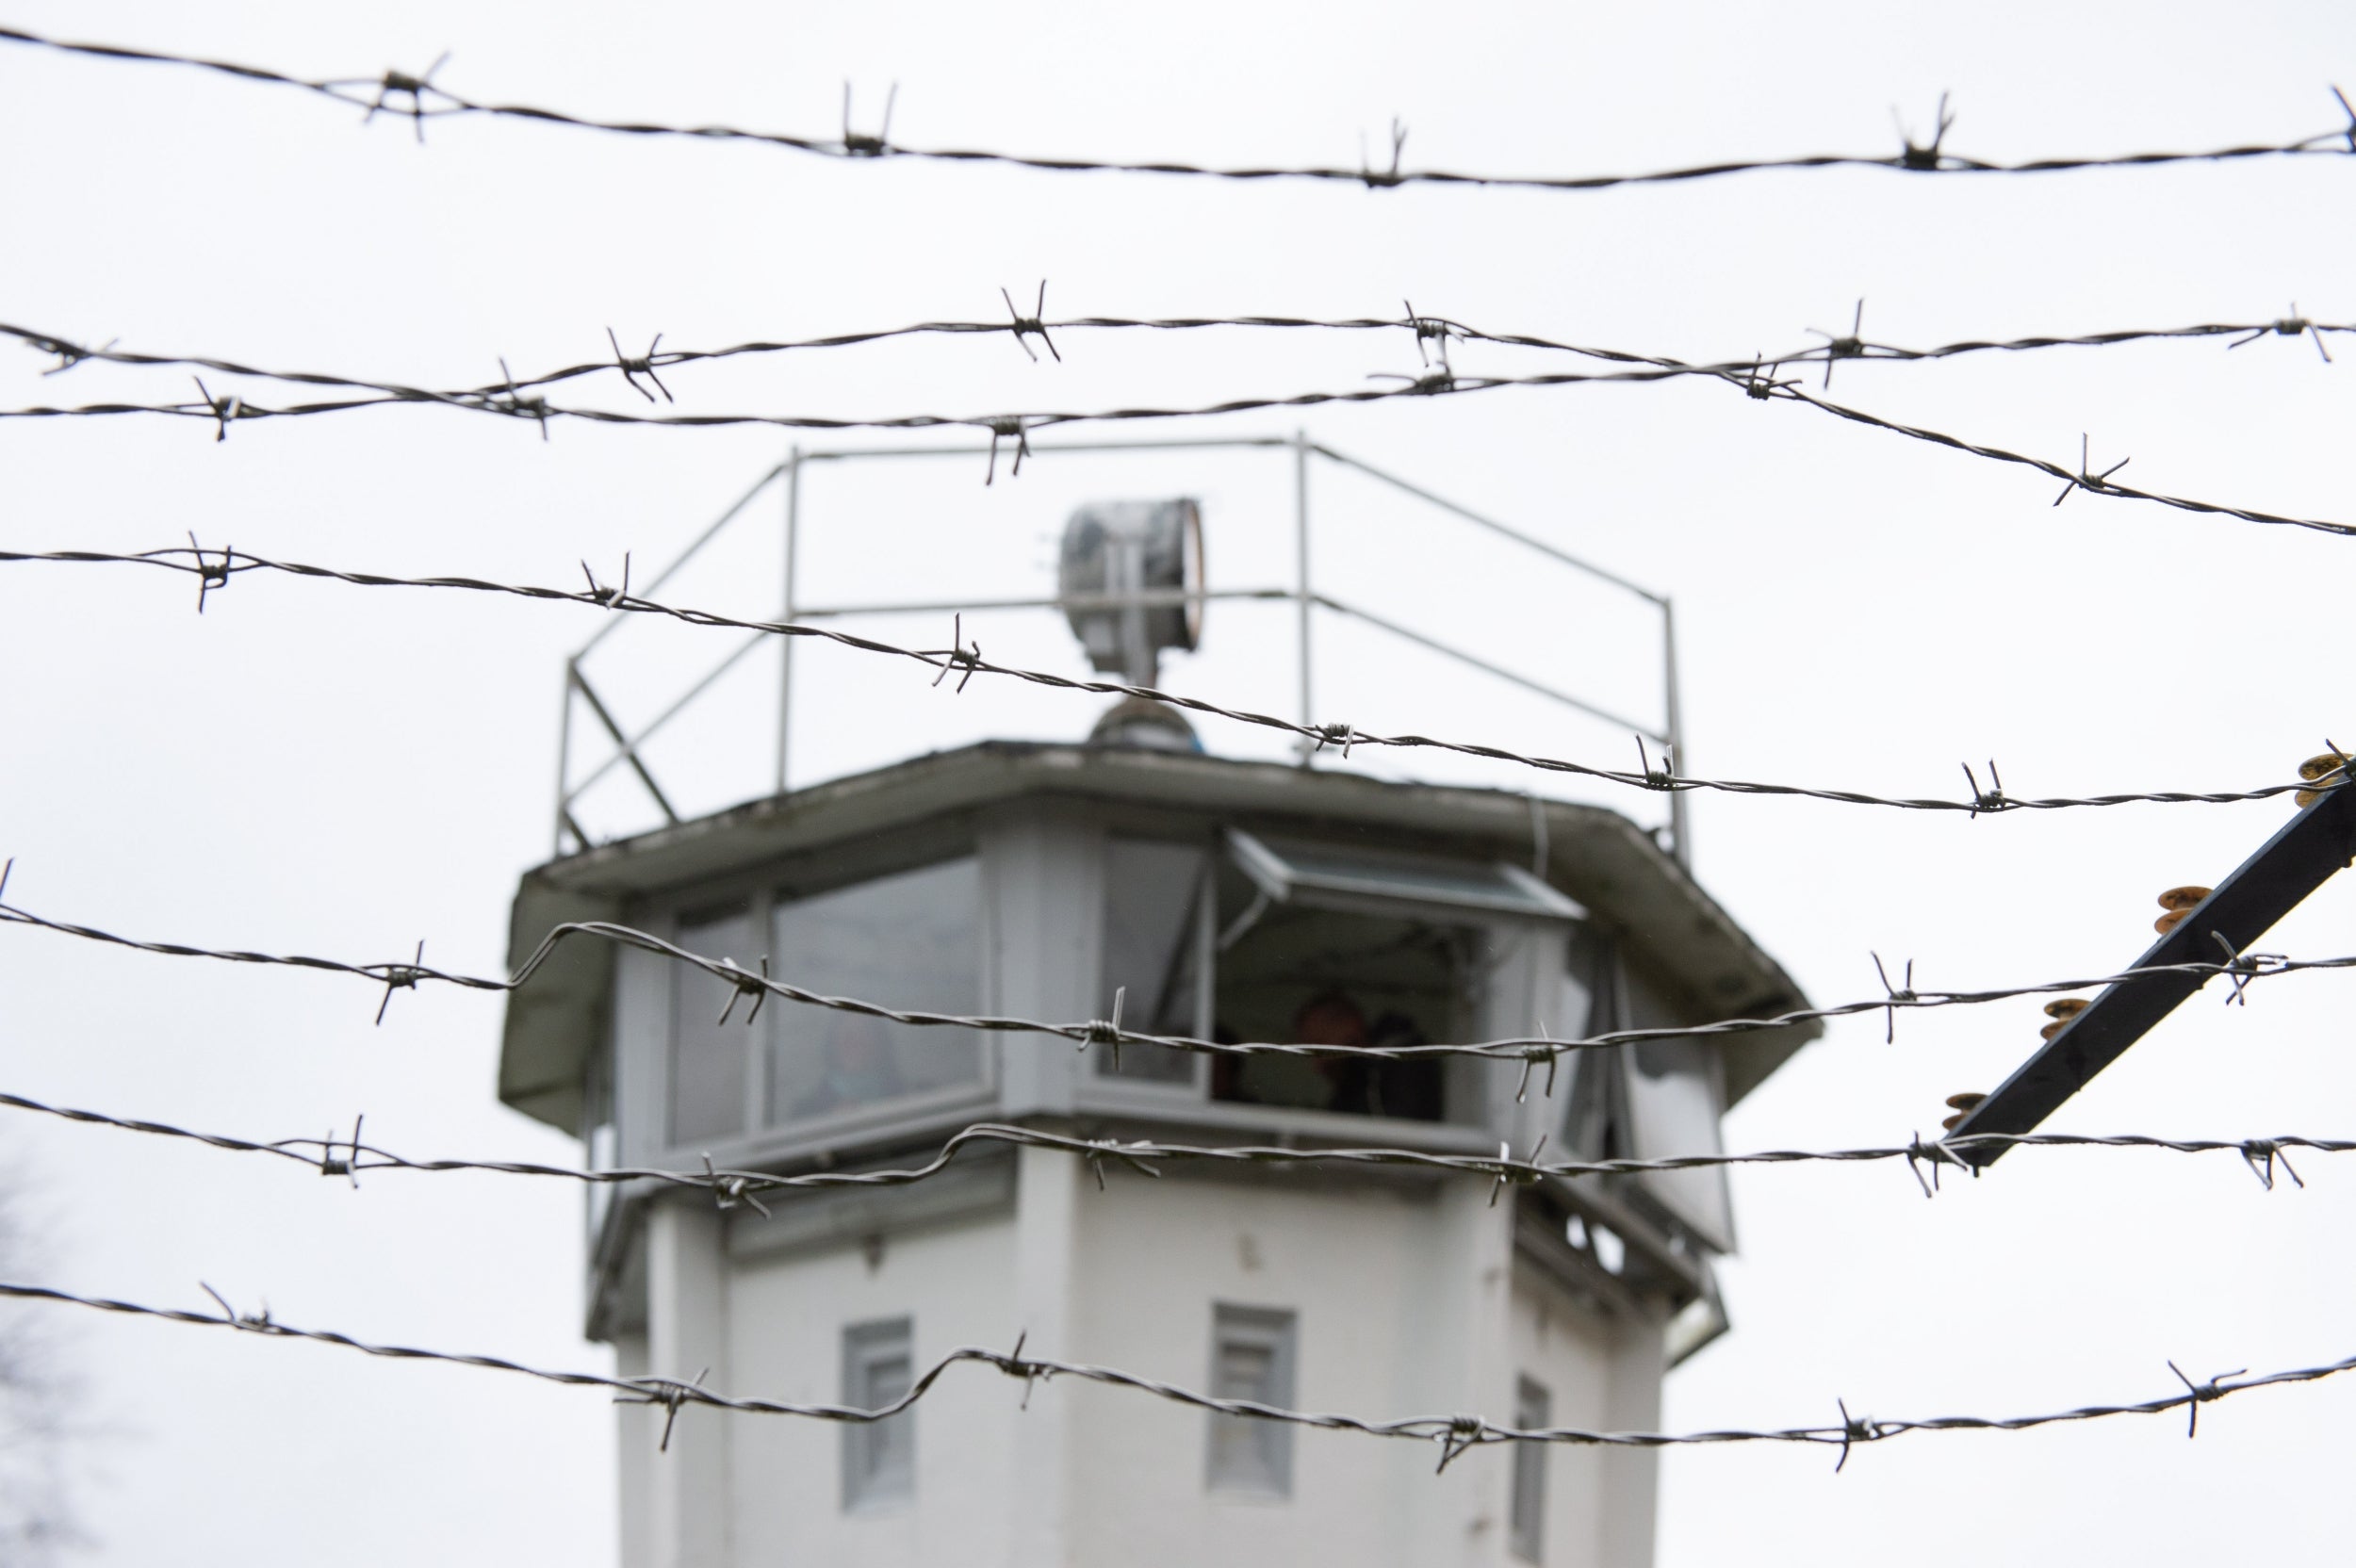 A watchtower behind a barbed fence on the former border between East and West Germany